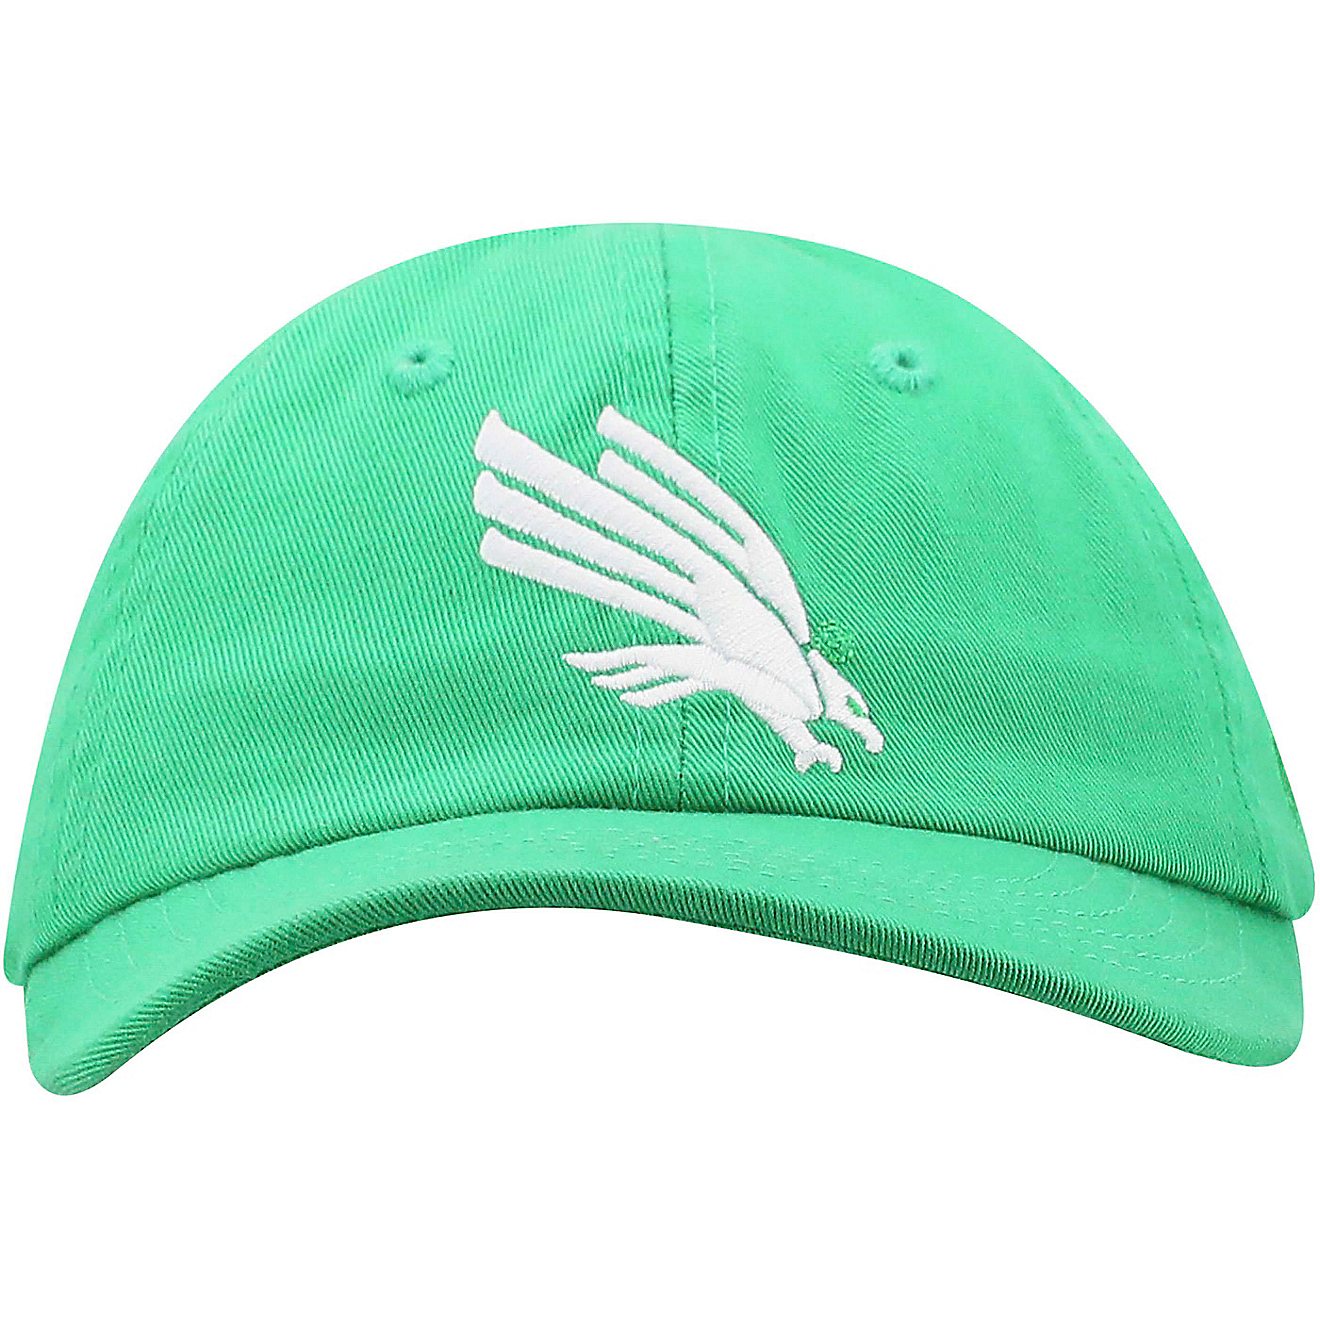 Top of the World Infants' University of North Texas Mini Me Cap                                                                  - view number 1